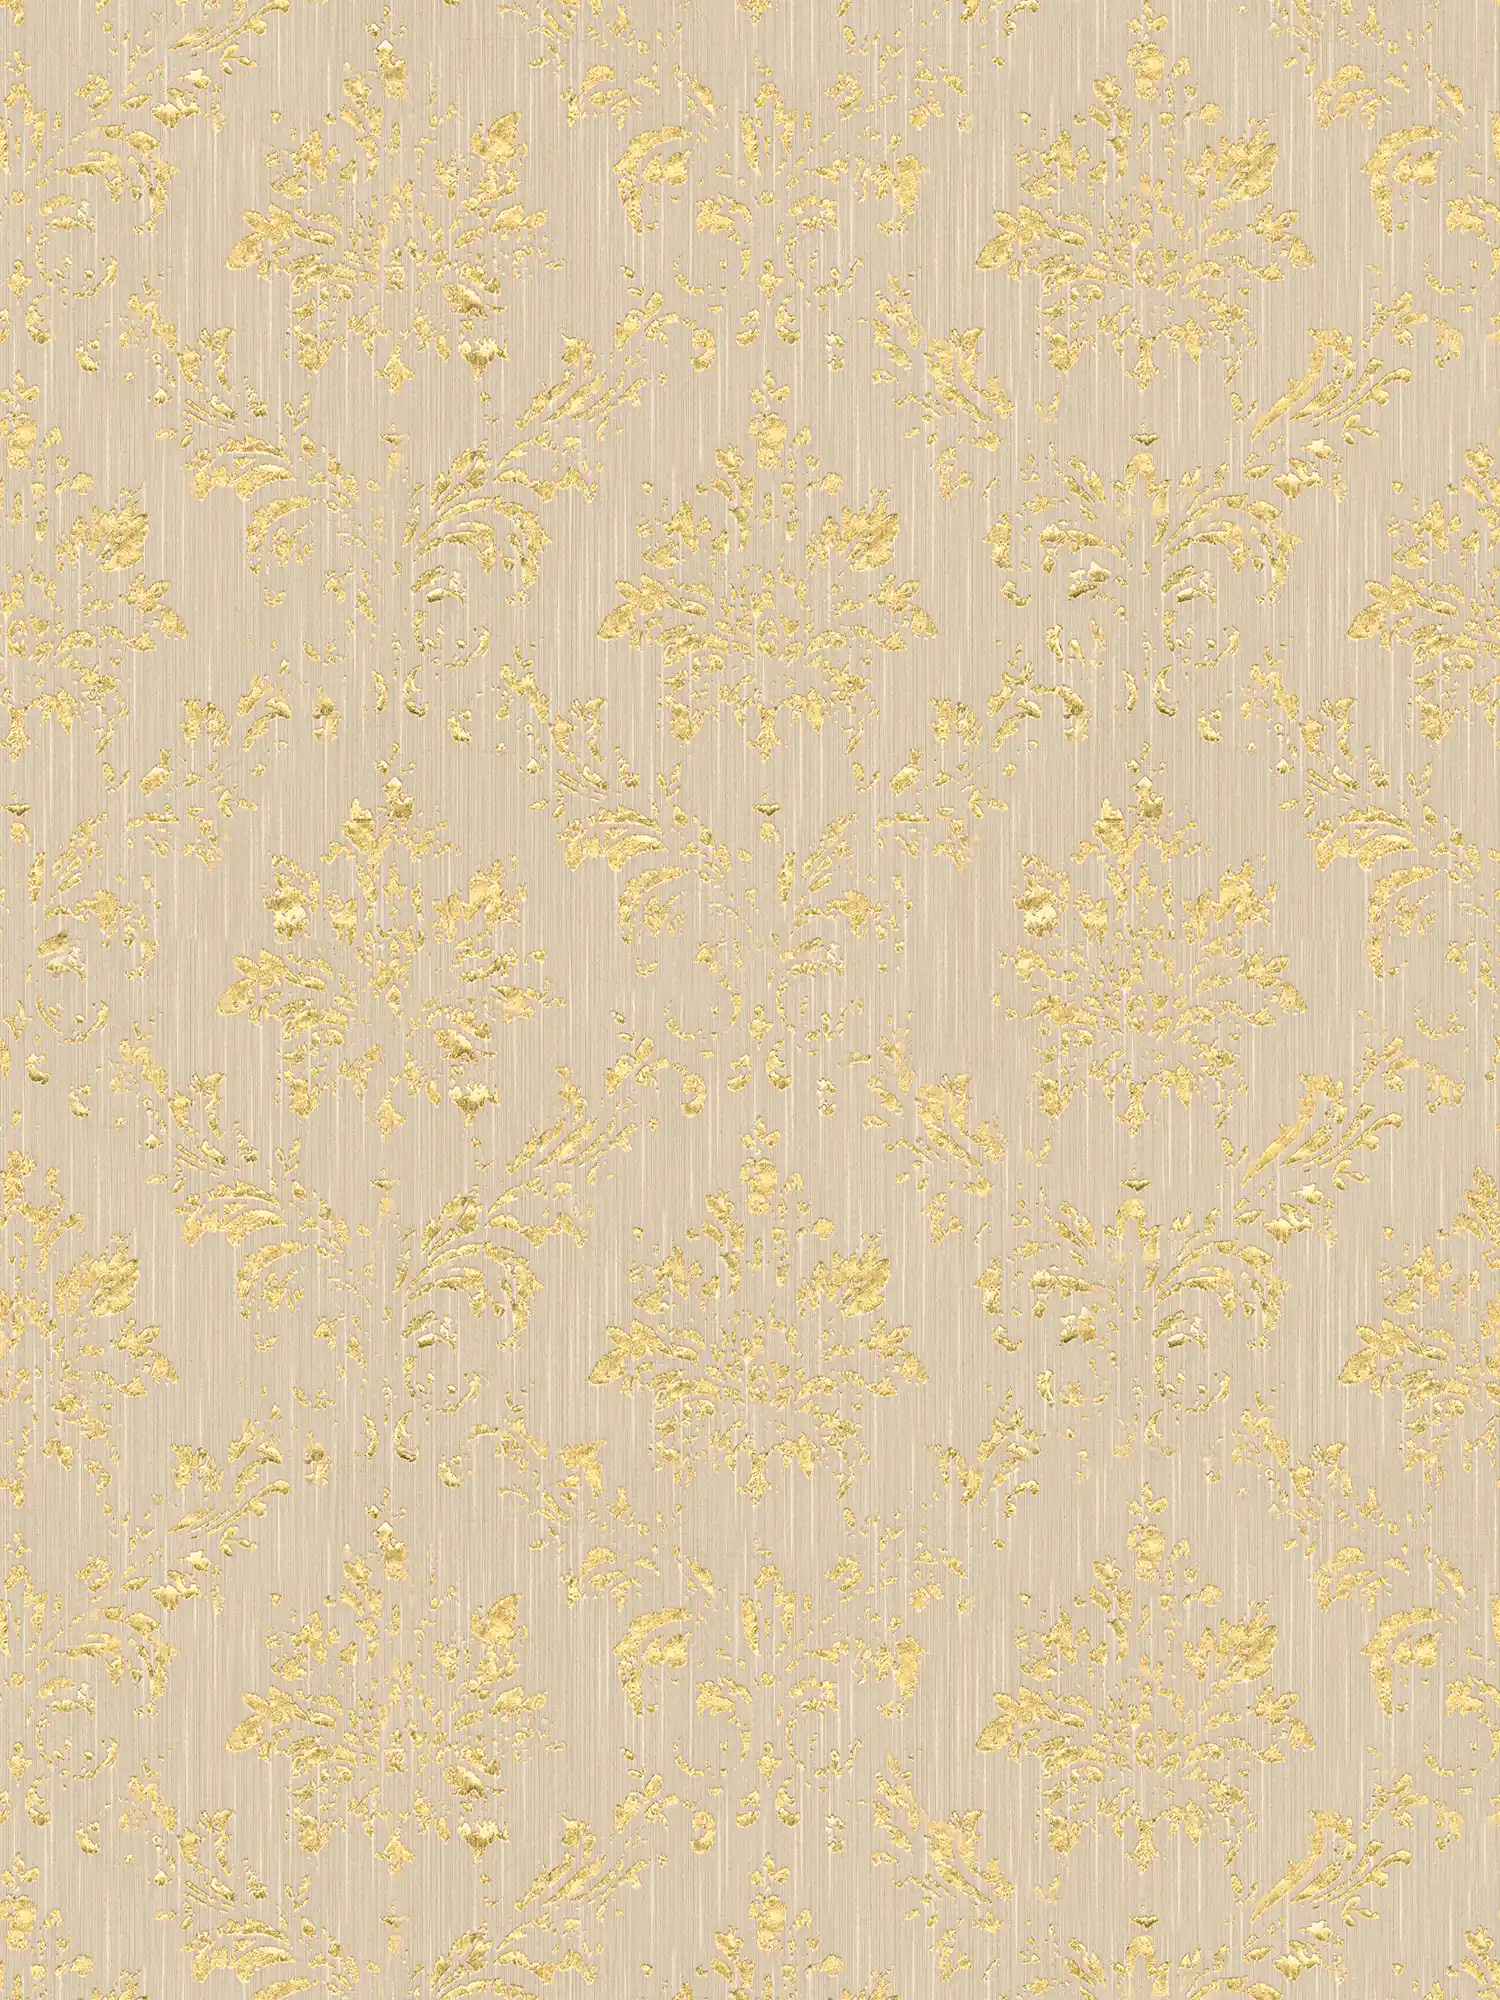 Wallpaper with gold ornaments in used look - beige, gold
